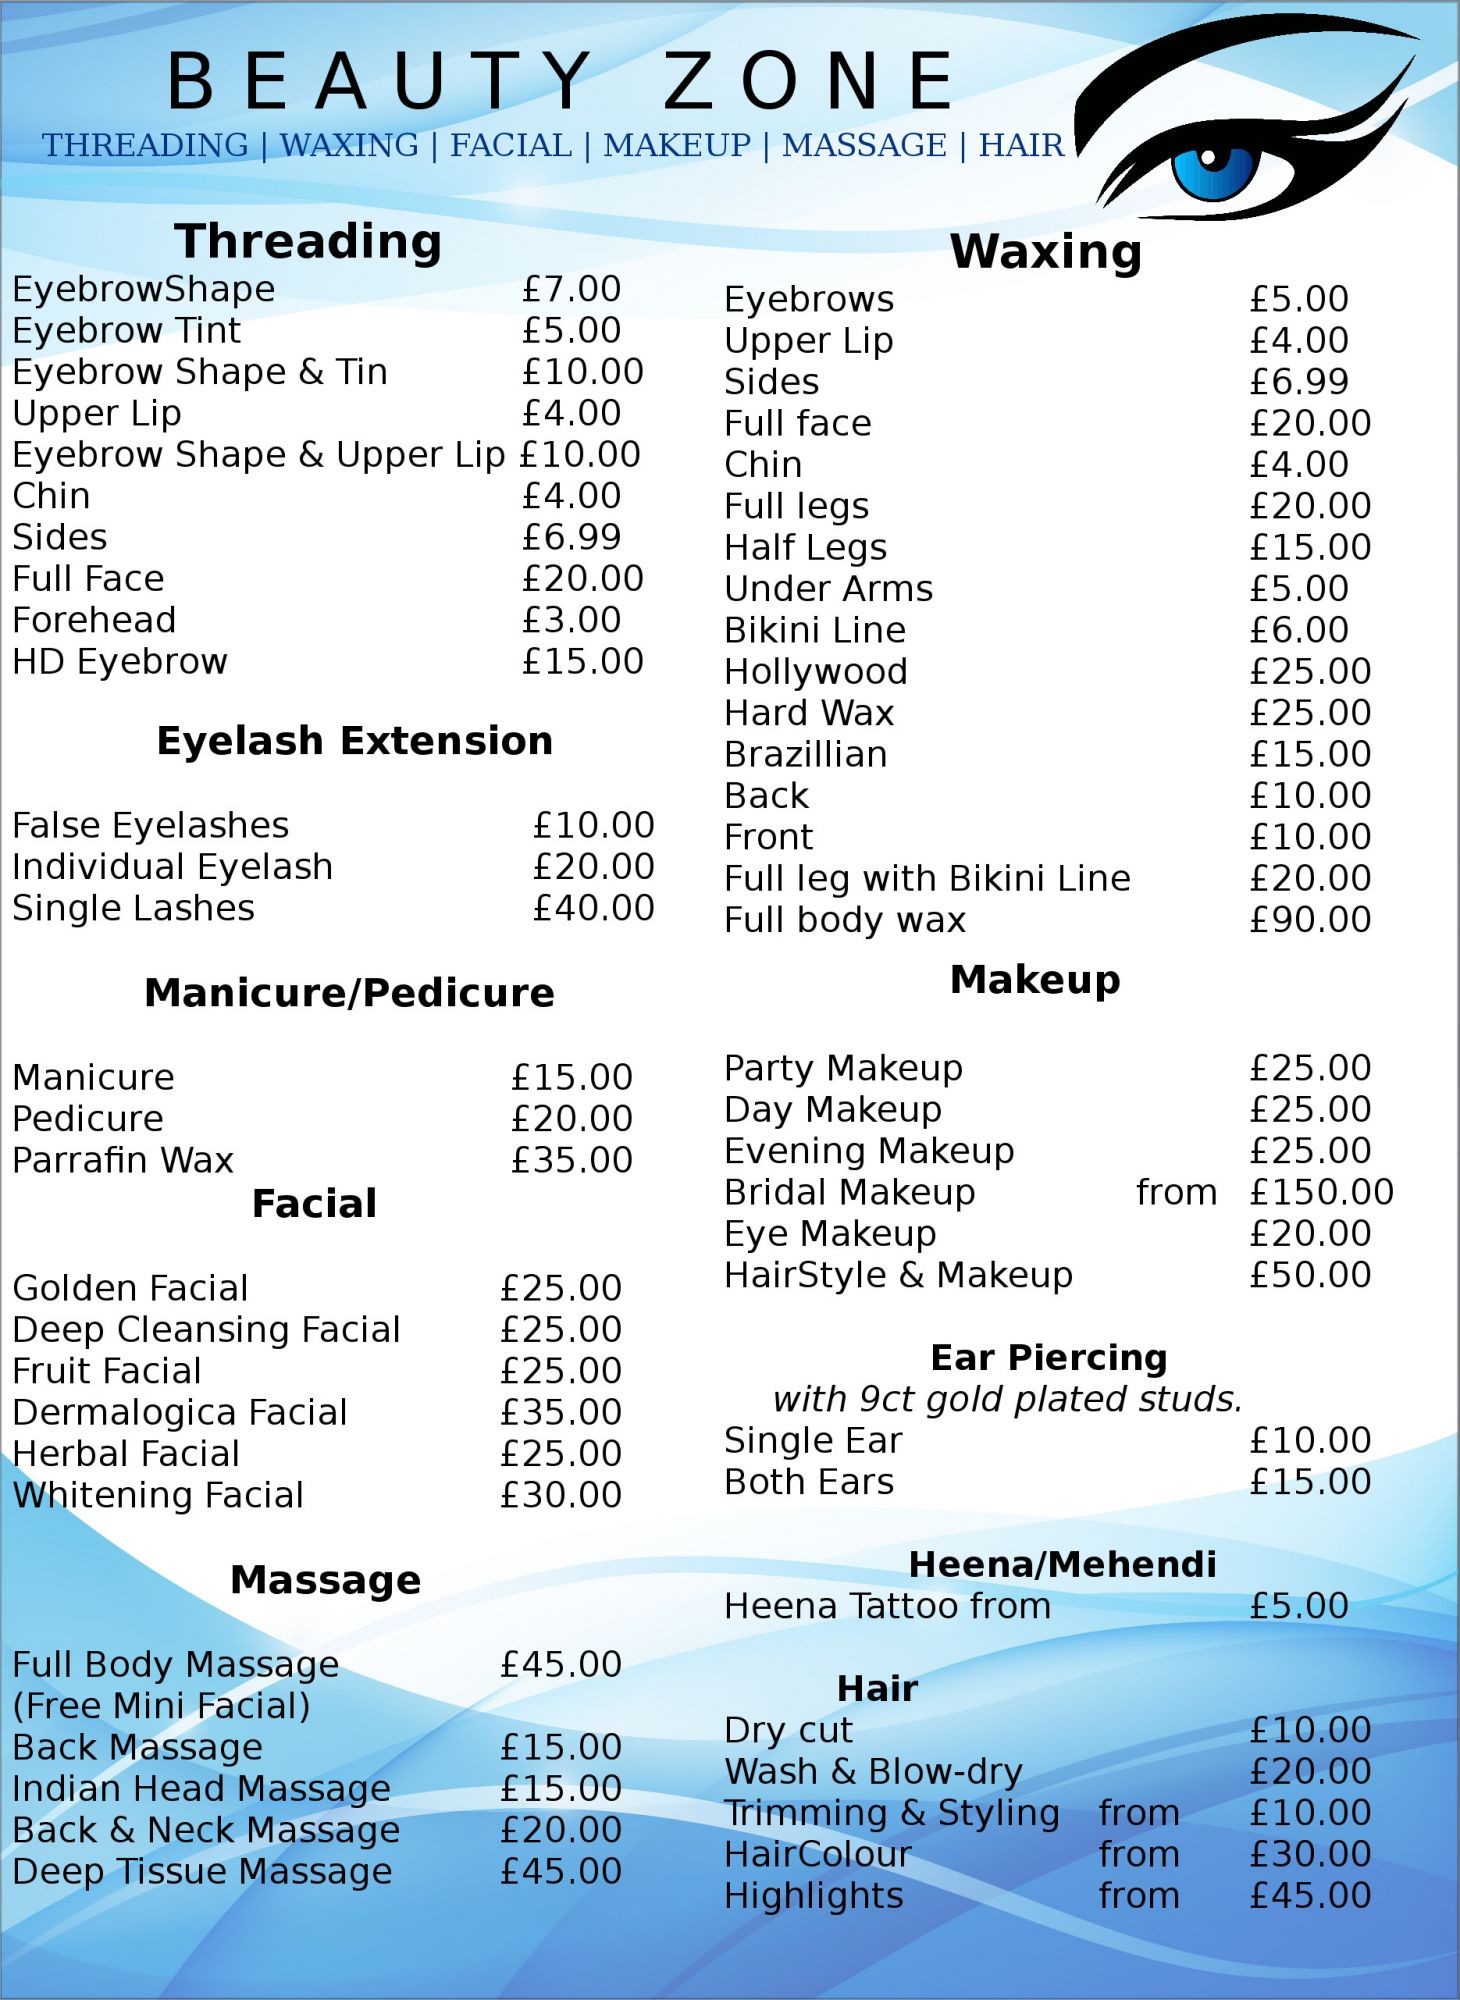 Price and Treatment list for Beauty Zone